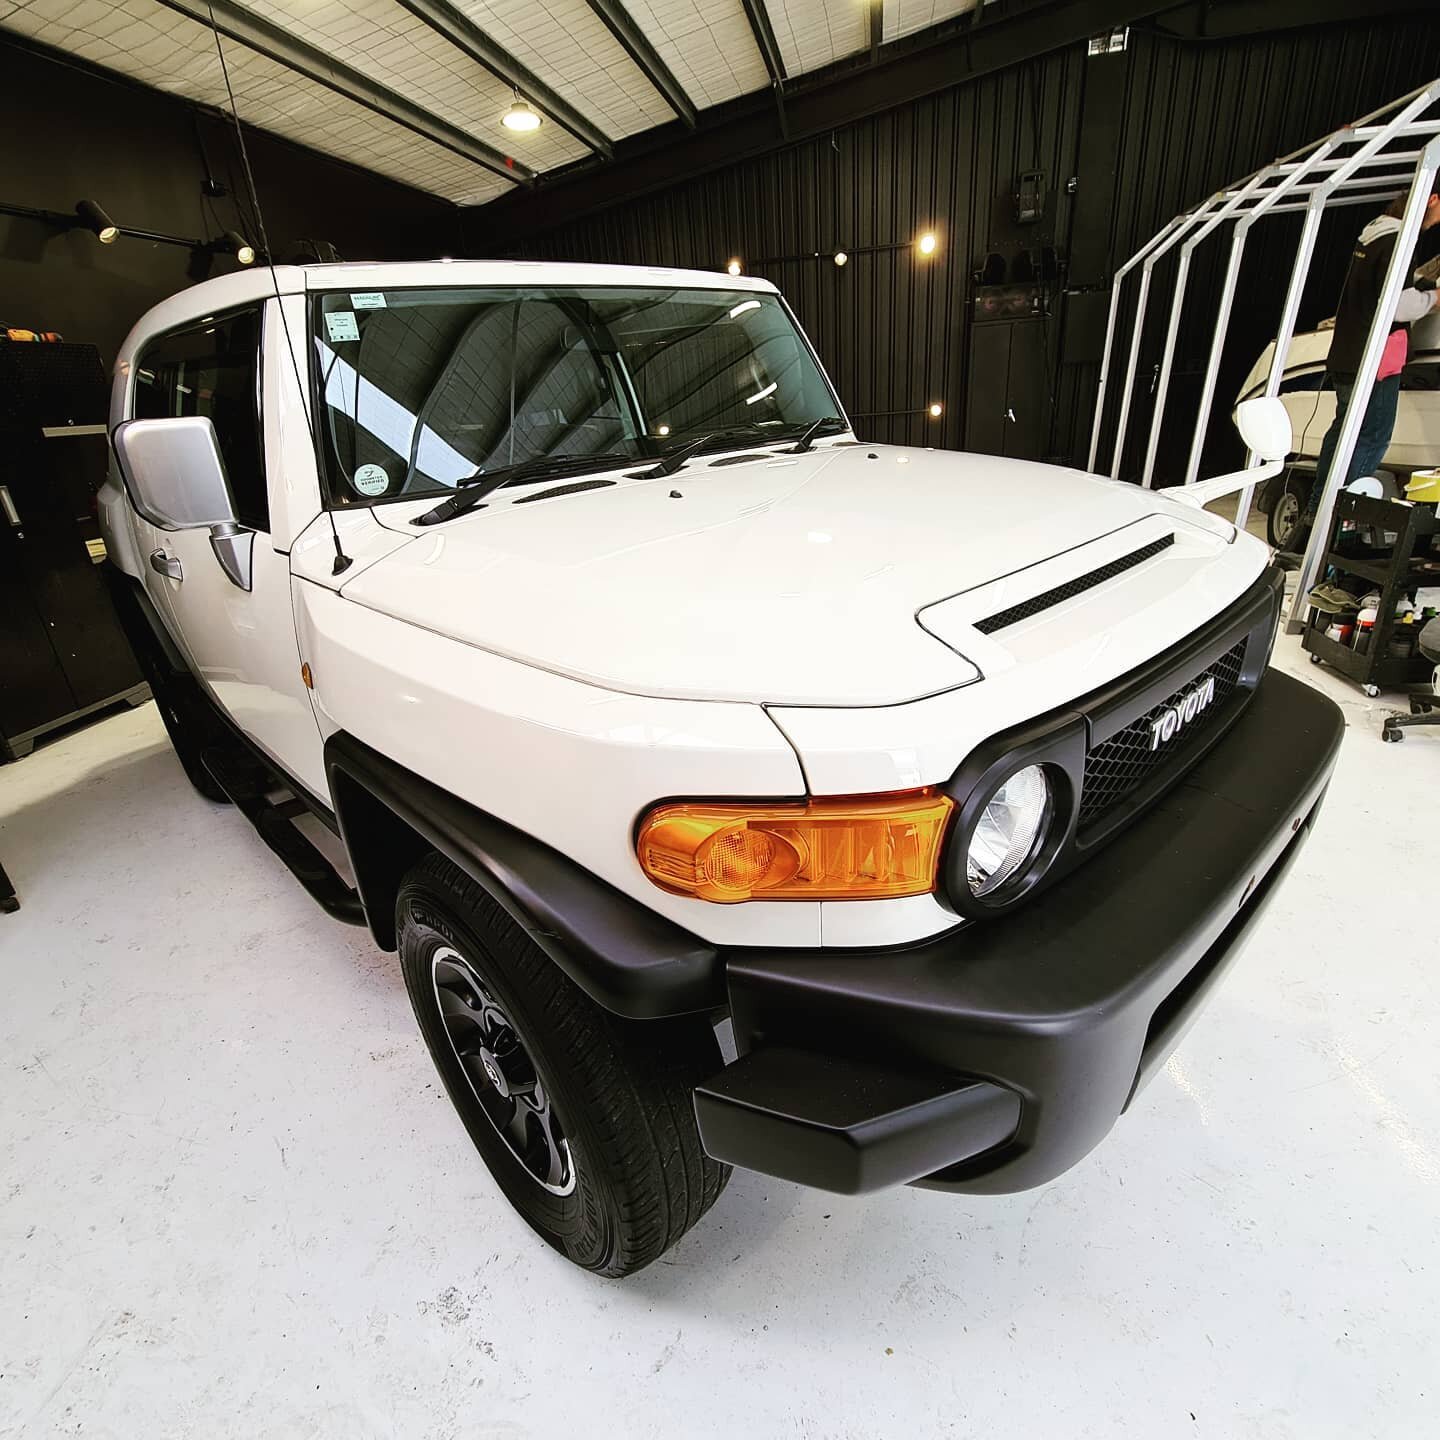 Dull and chalky to brilliant gloss.

This FJ cruiser received a 3 stage edge to edge paint correction.

Current condition: betterthannew.

02102942908
www.wanacleancar.co.nz